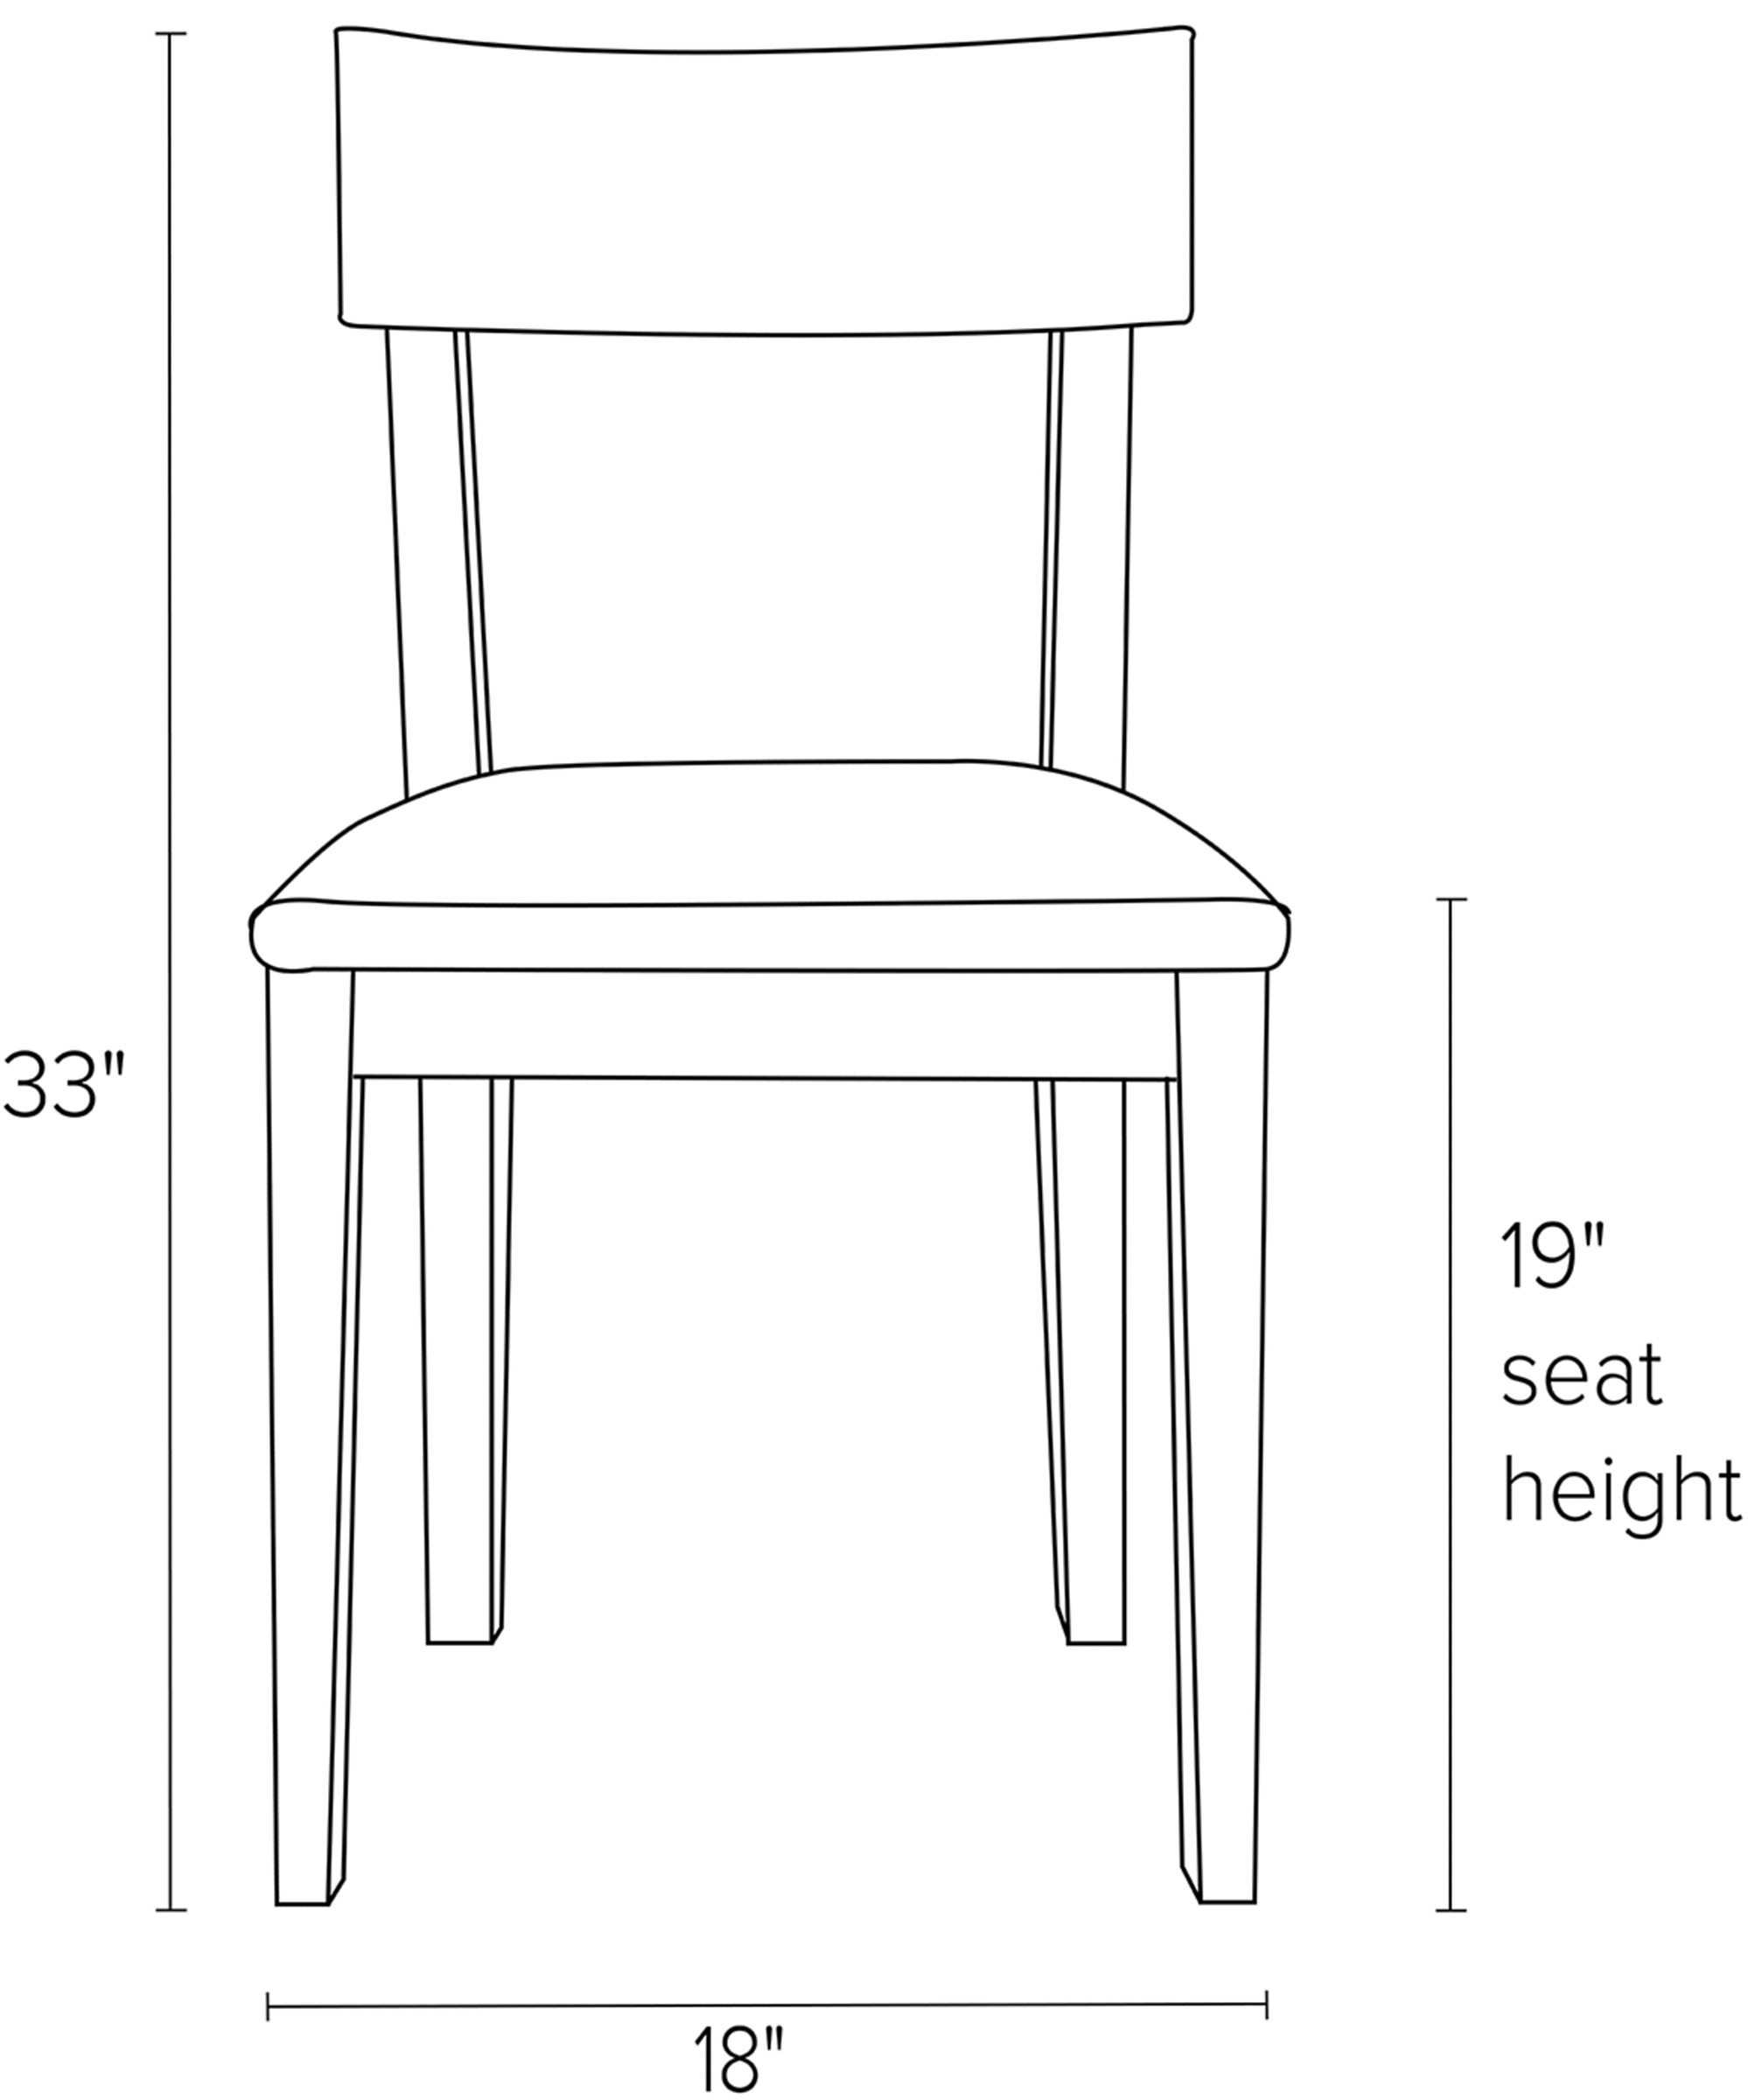 Front view dimension illustration of Doyle side chair.